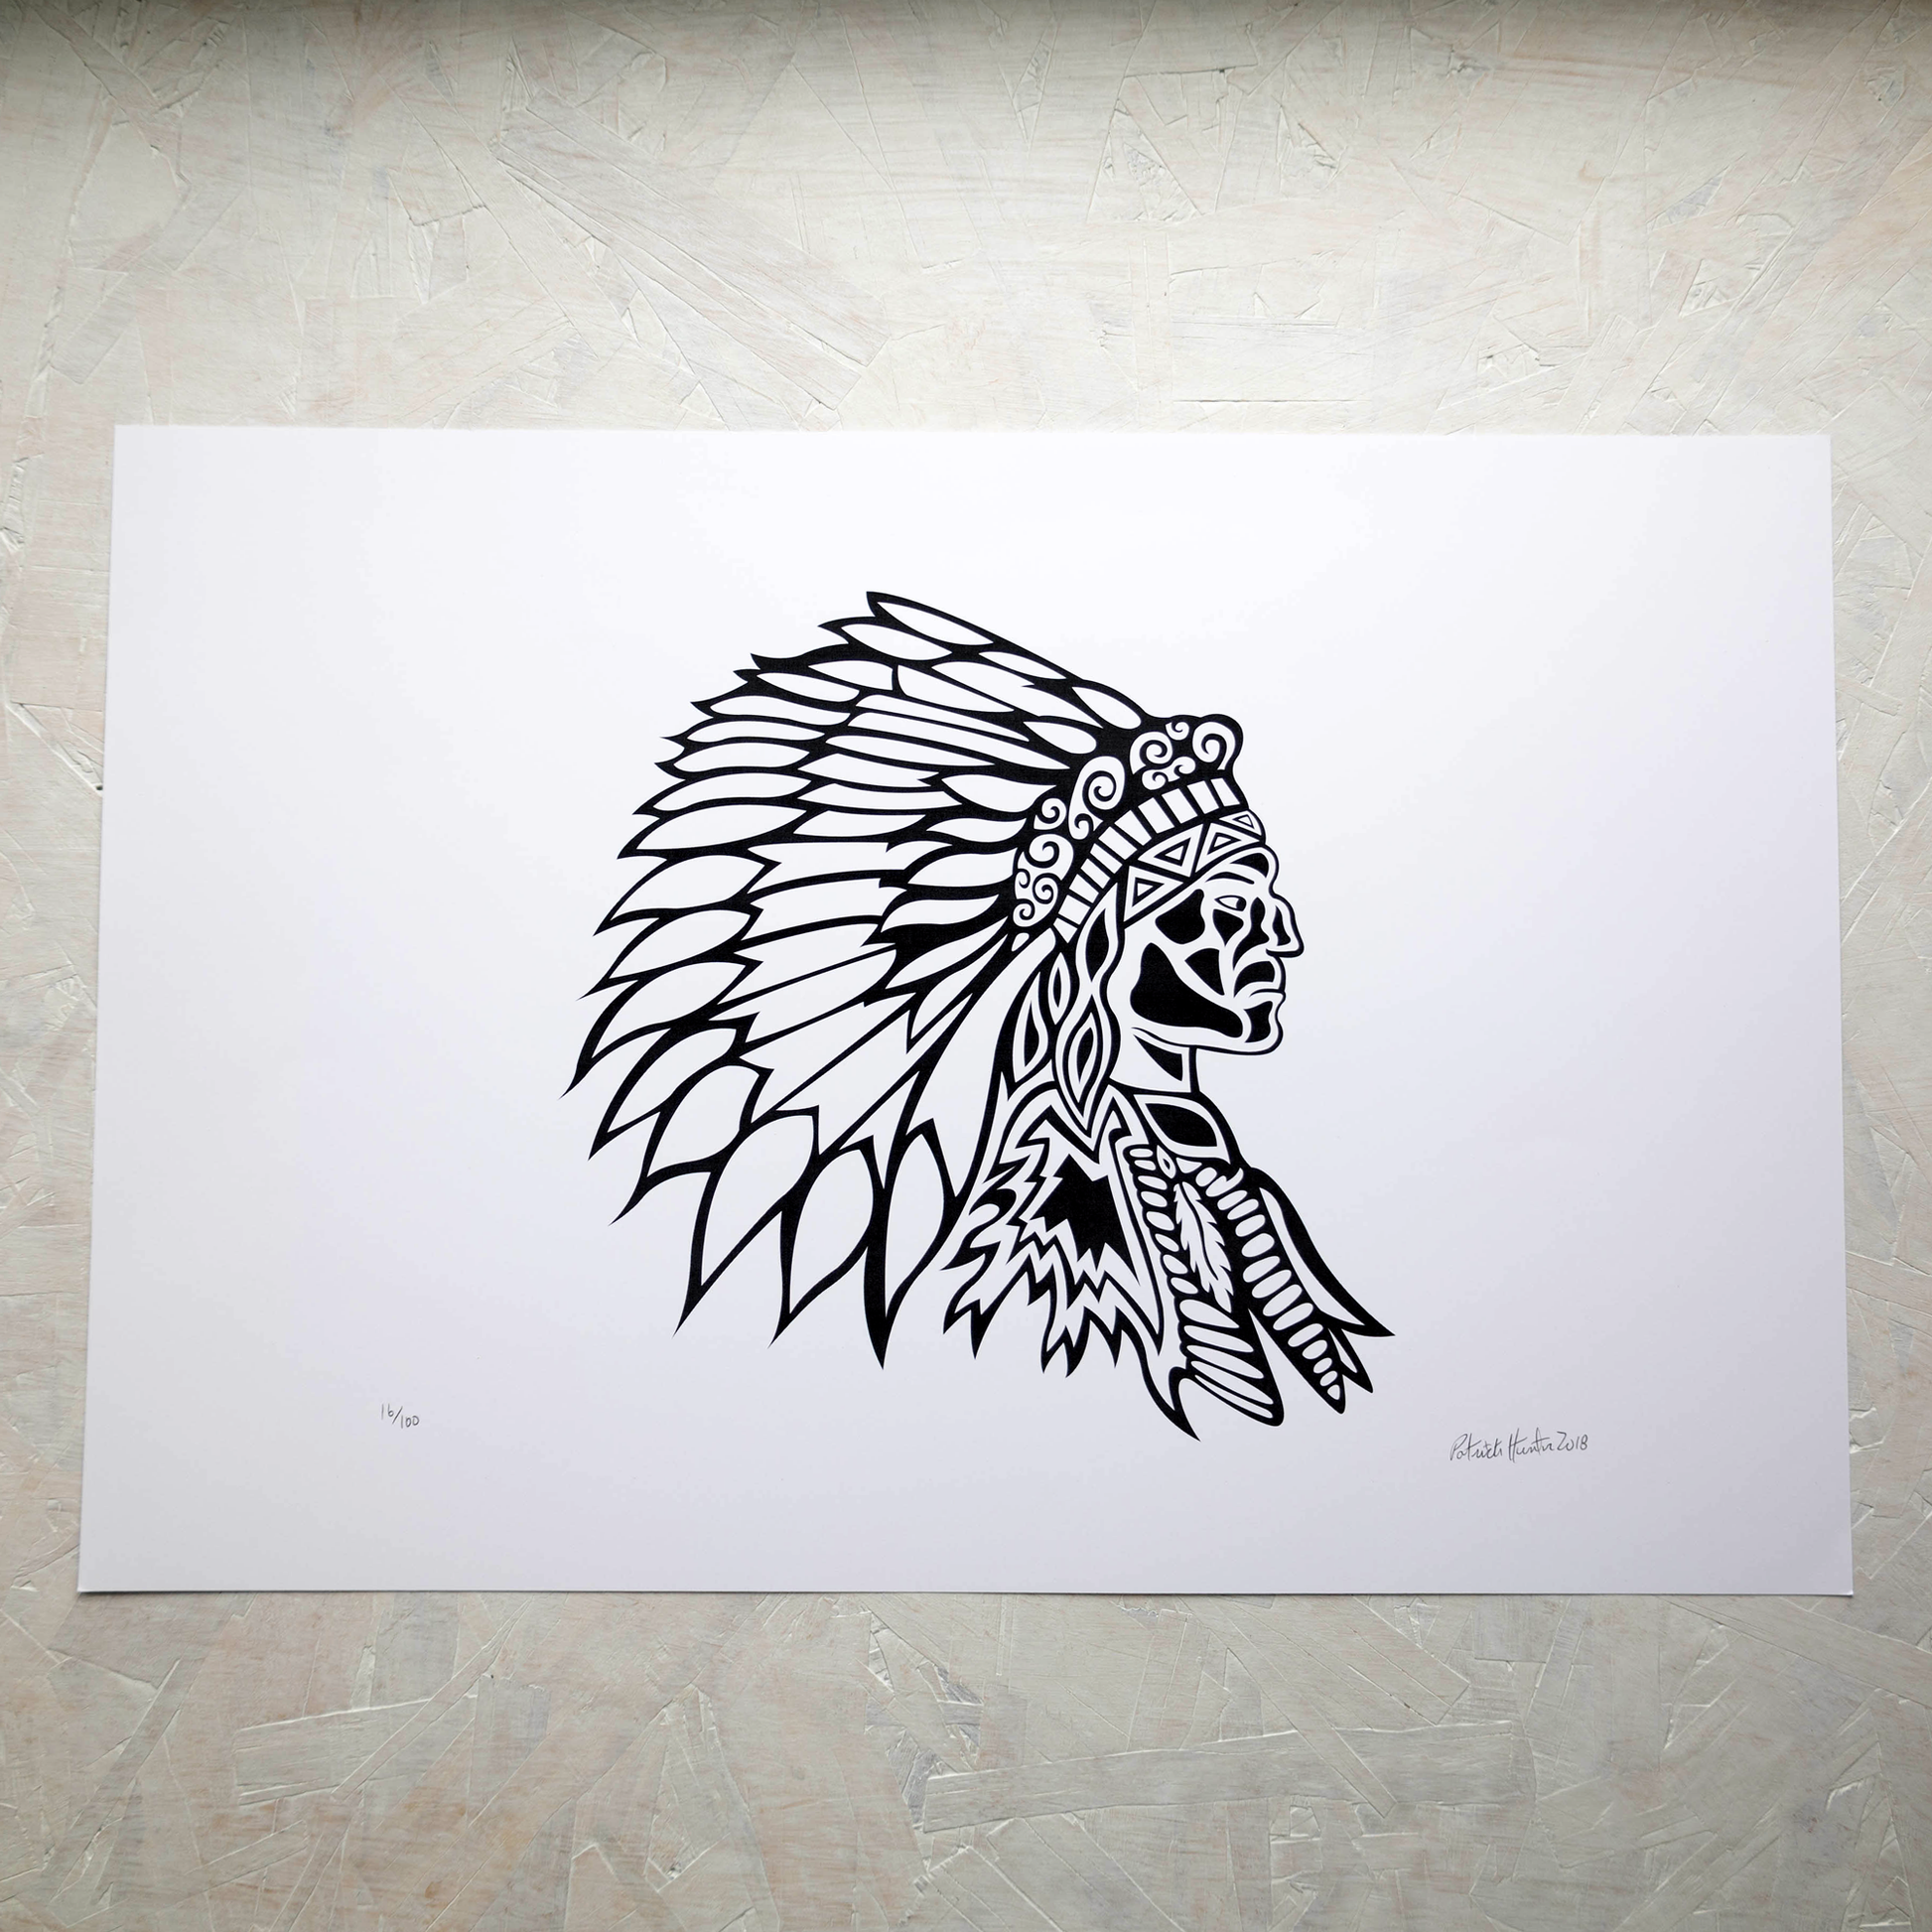 Print of Patrick Hunter's painting of the figure of a person in feather headdress in black and white woodland art style.